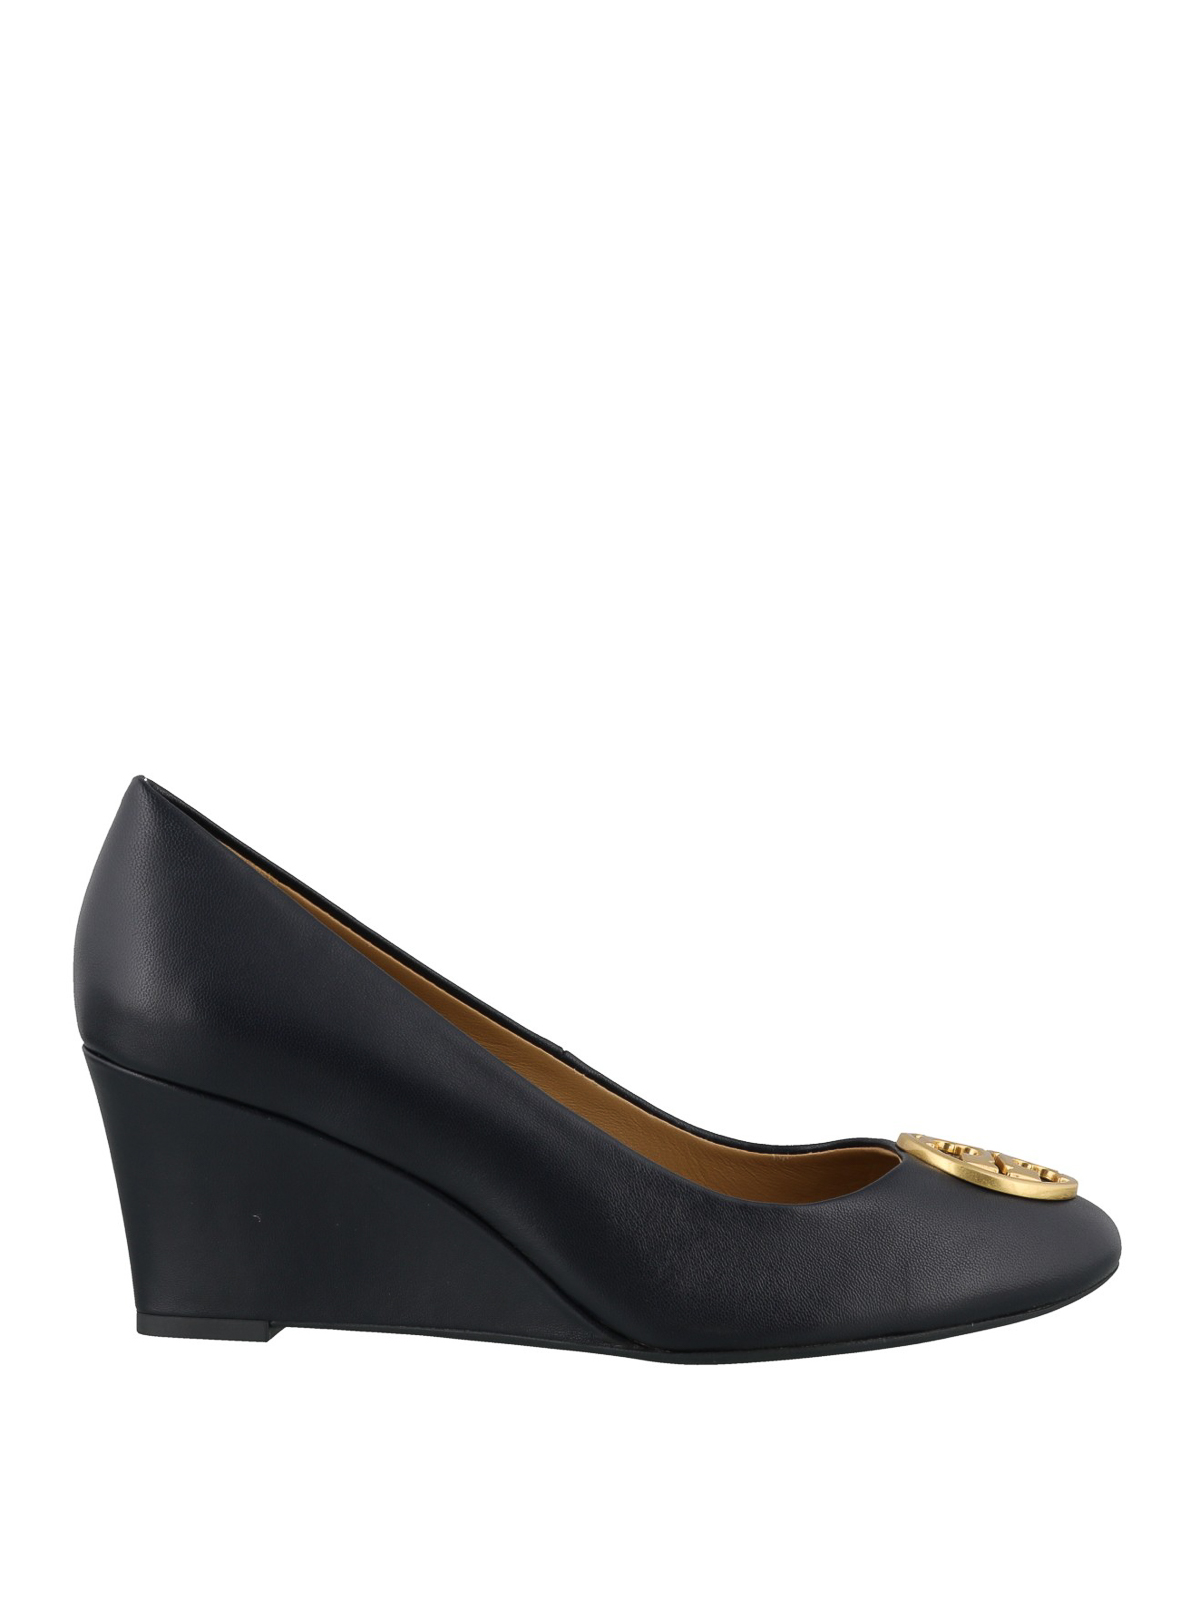 navy blue wedge court shoes